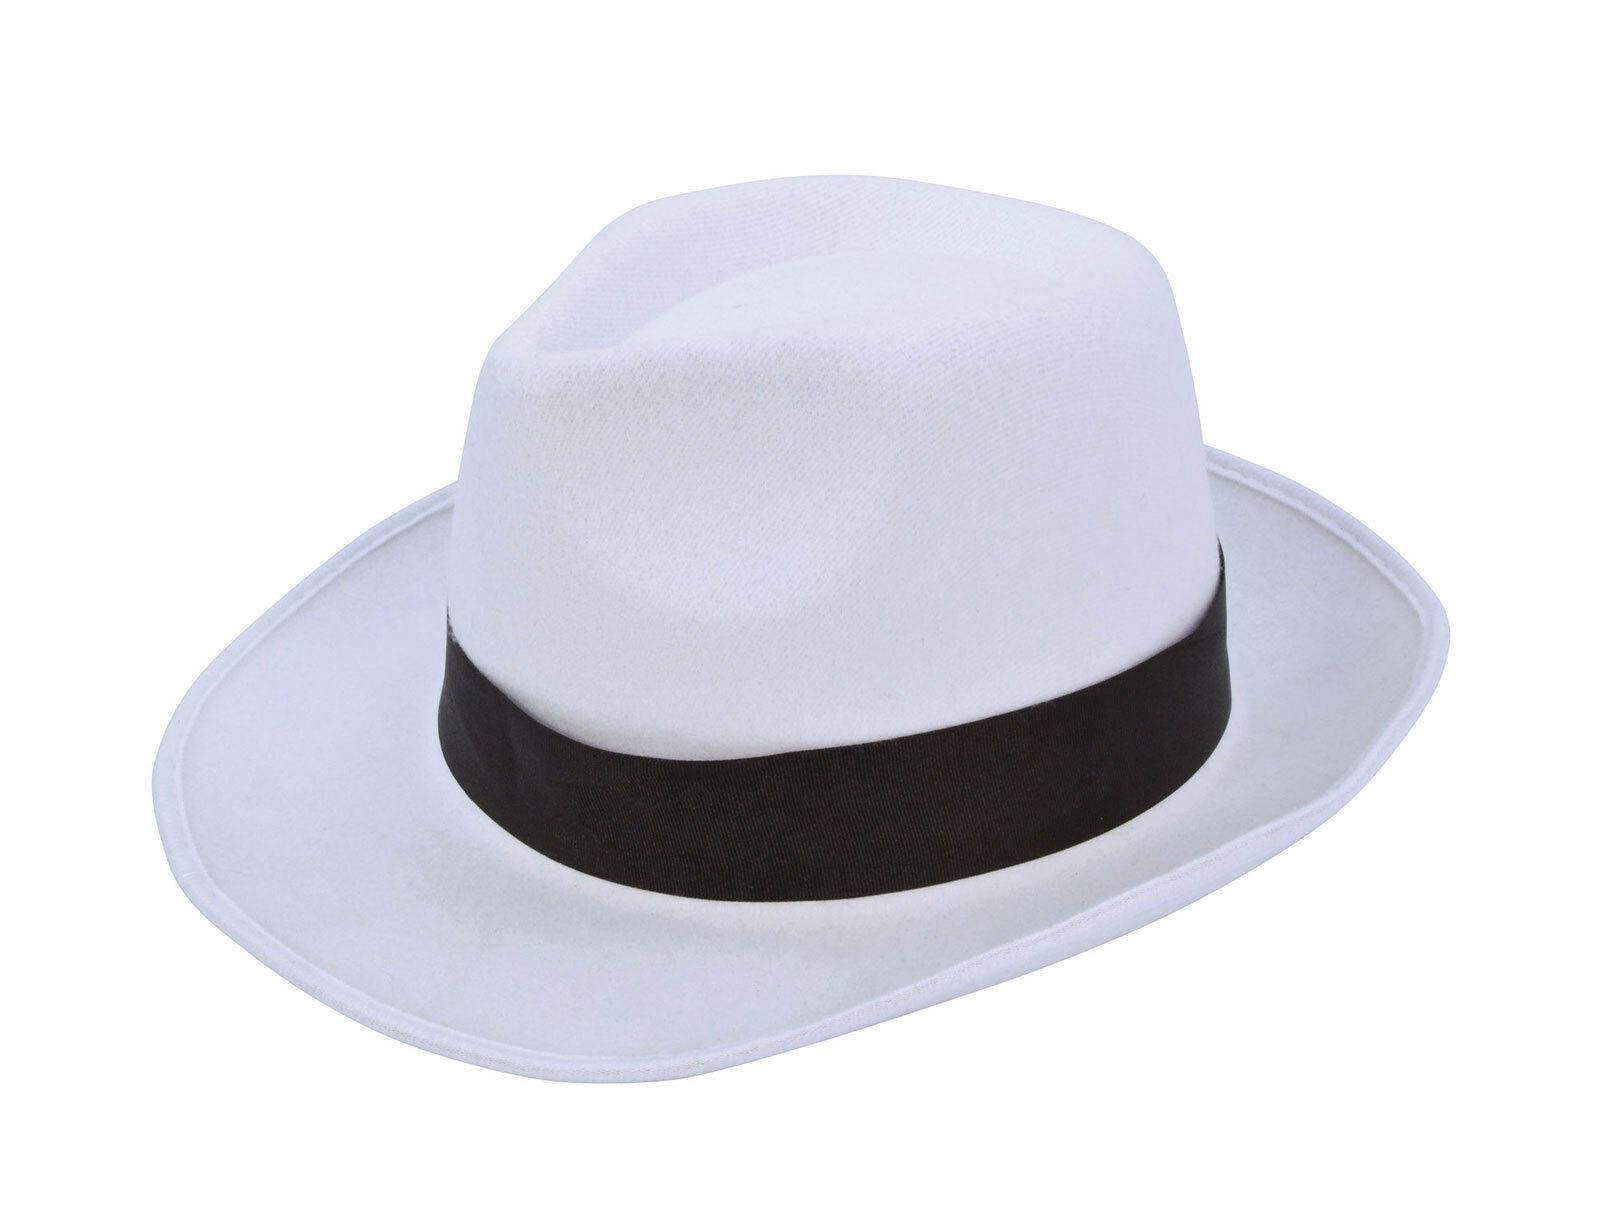 Boys Gangster Hat White with Black Band Mafia Fancy Outfit Accessory - Labreeze